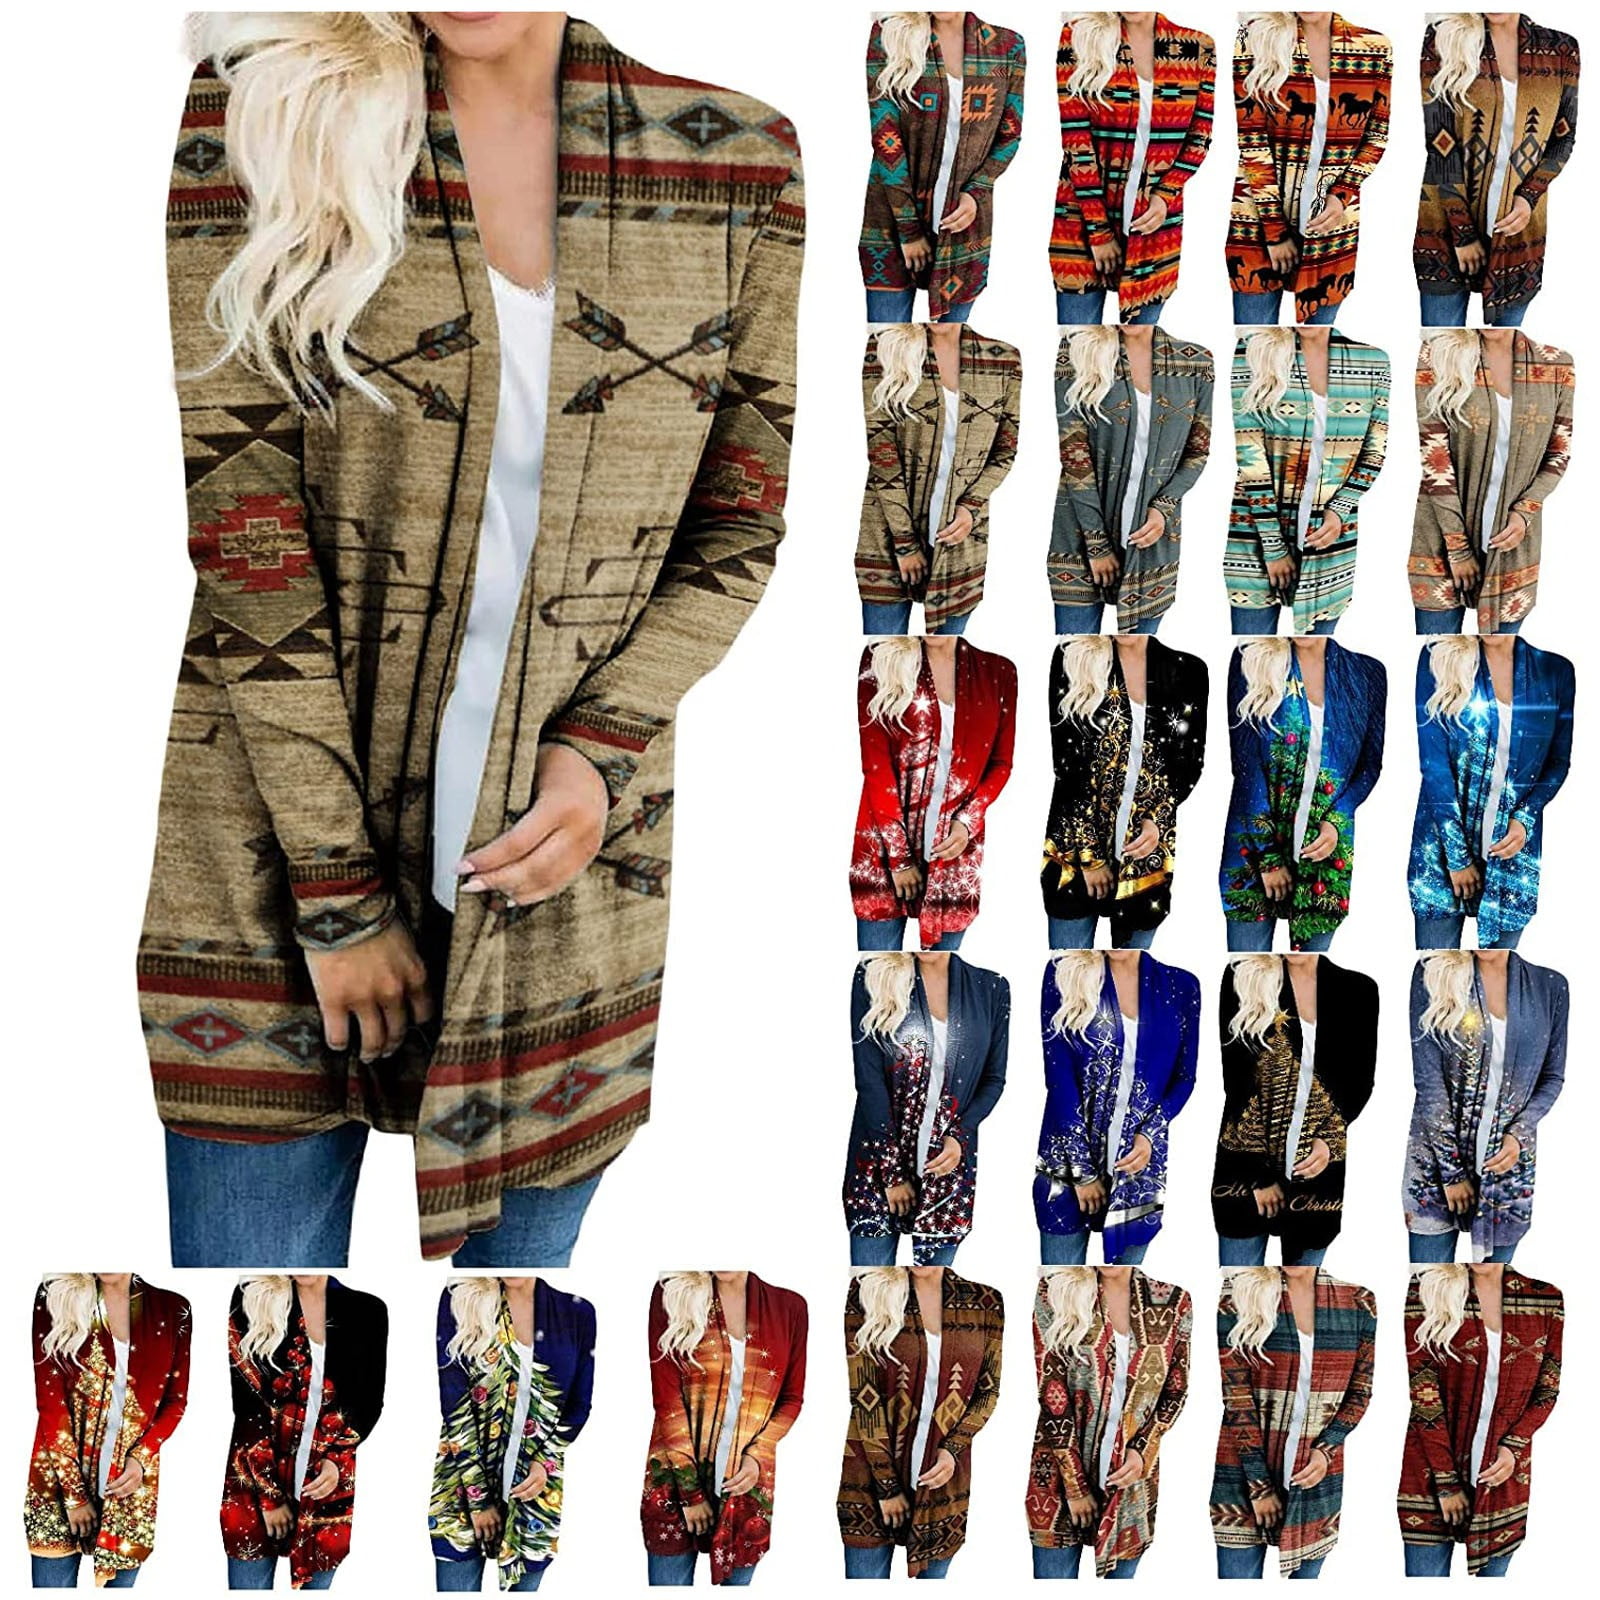 Sleeve Top Lightweight Women\'s Long Printed Jacket,Blue WGOUP Cardigan Front